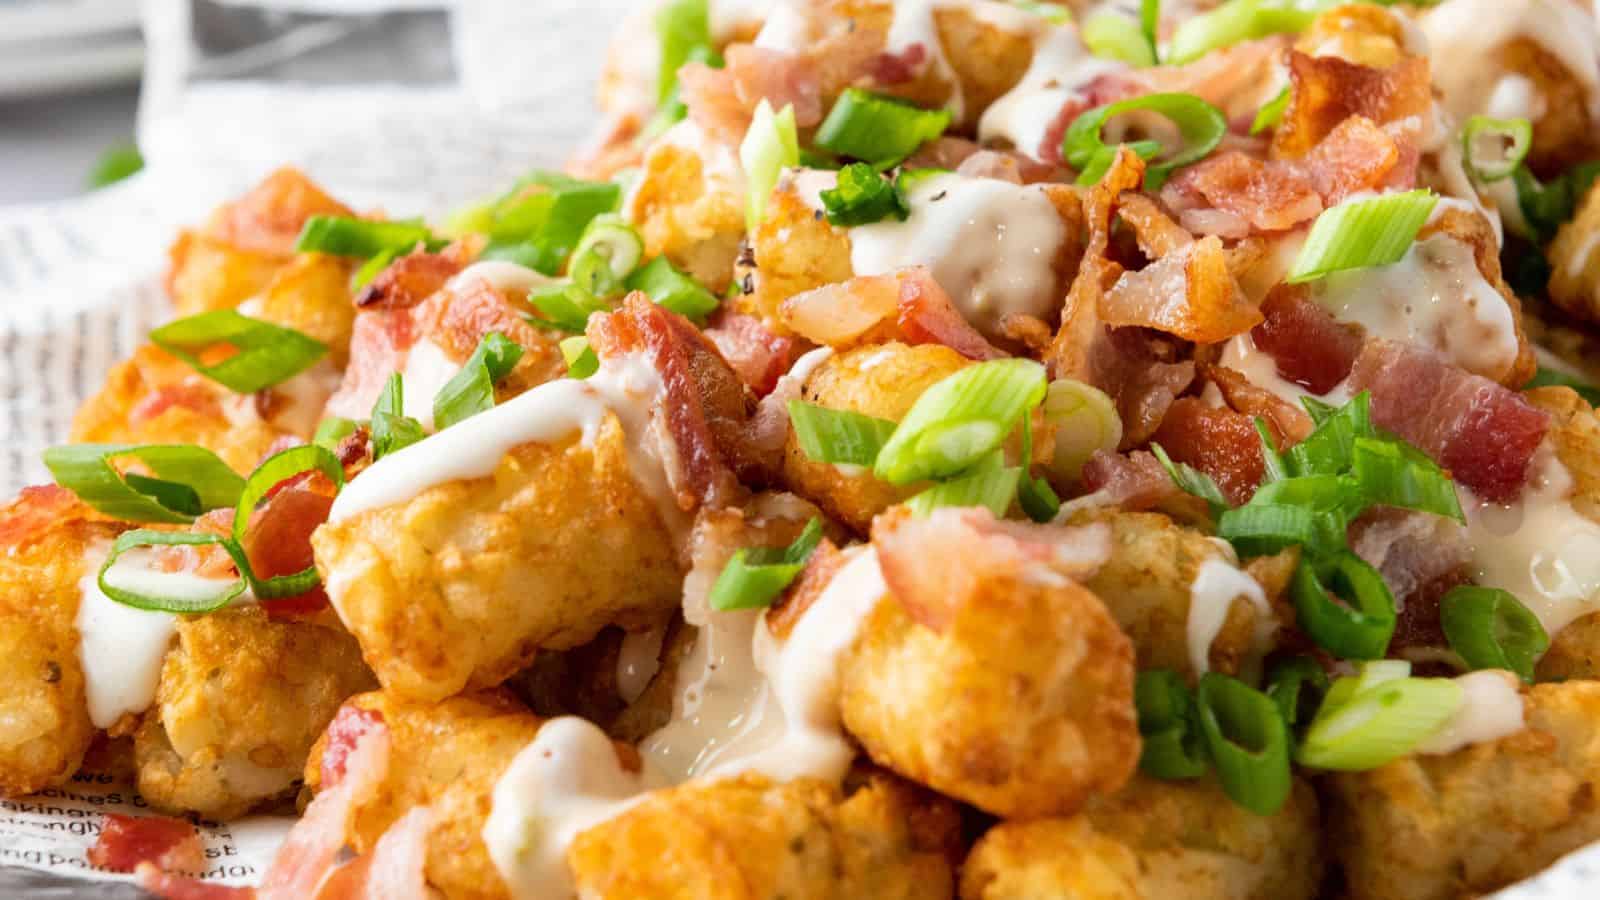 Loaded Tater Tots close-up topped with crumbled bacon, drizzled with ranch dressing, and garnished with sliced green onions on a white plate.